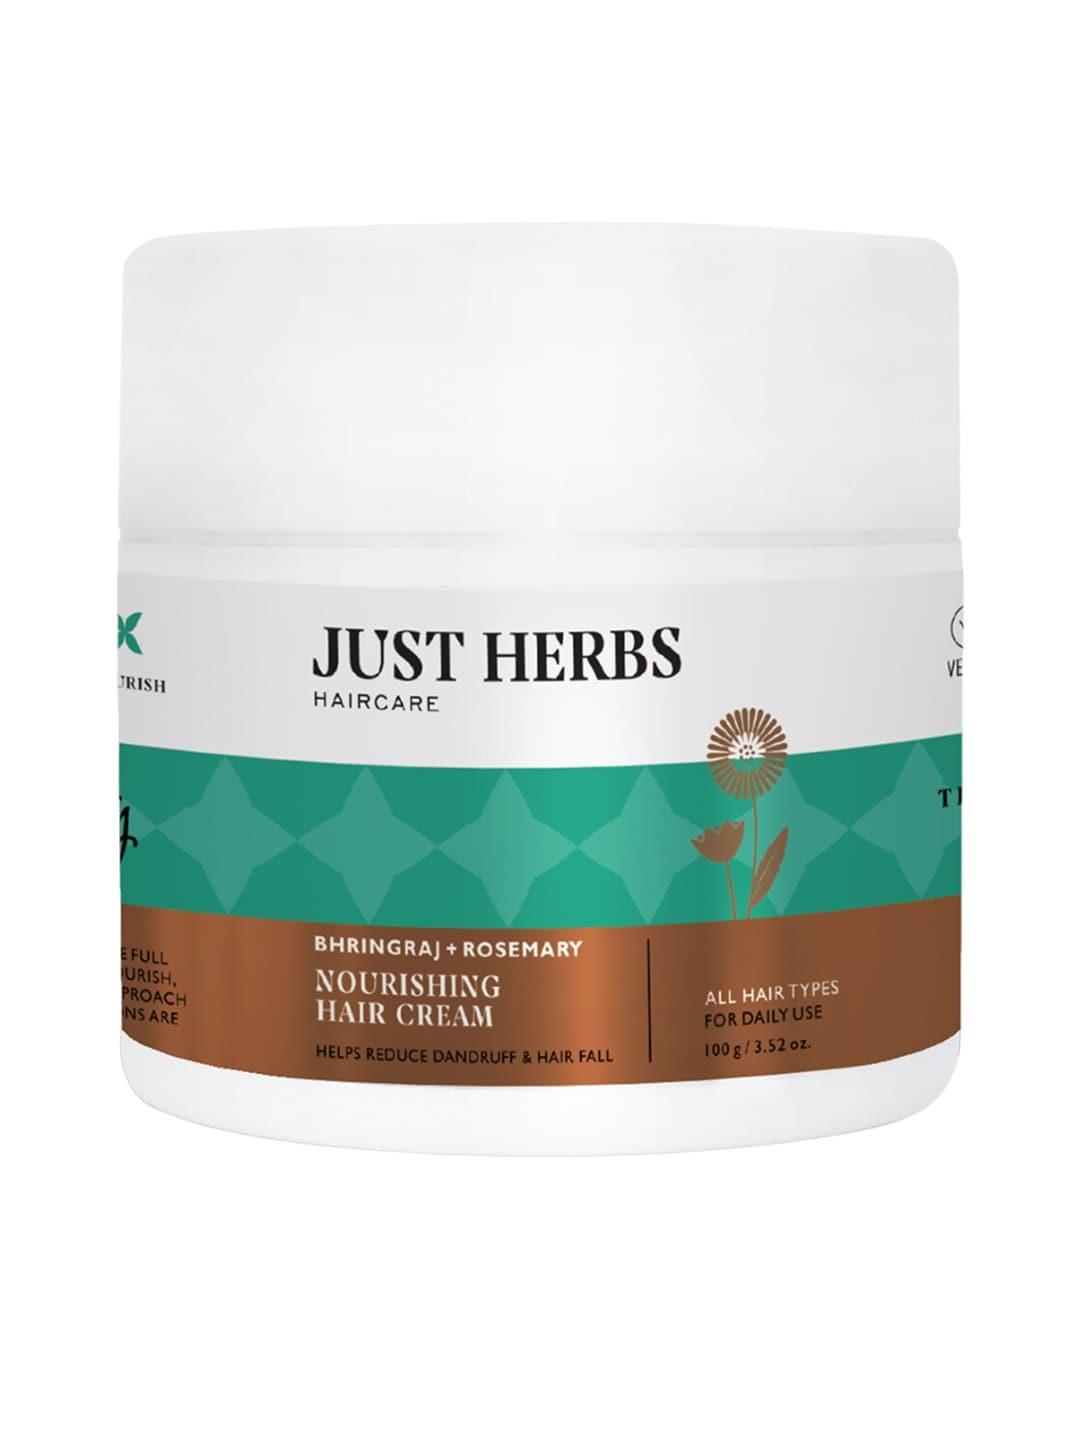 Just Herbs Nourishing Hair Mask Cream For Dry and Frizzy Hairs - 100g